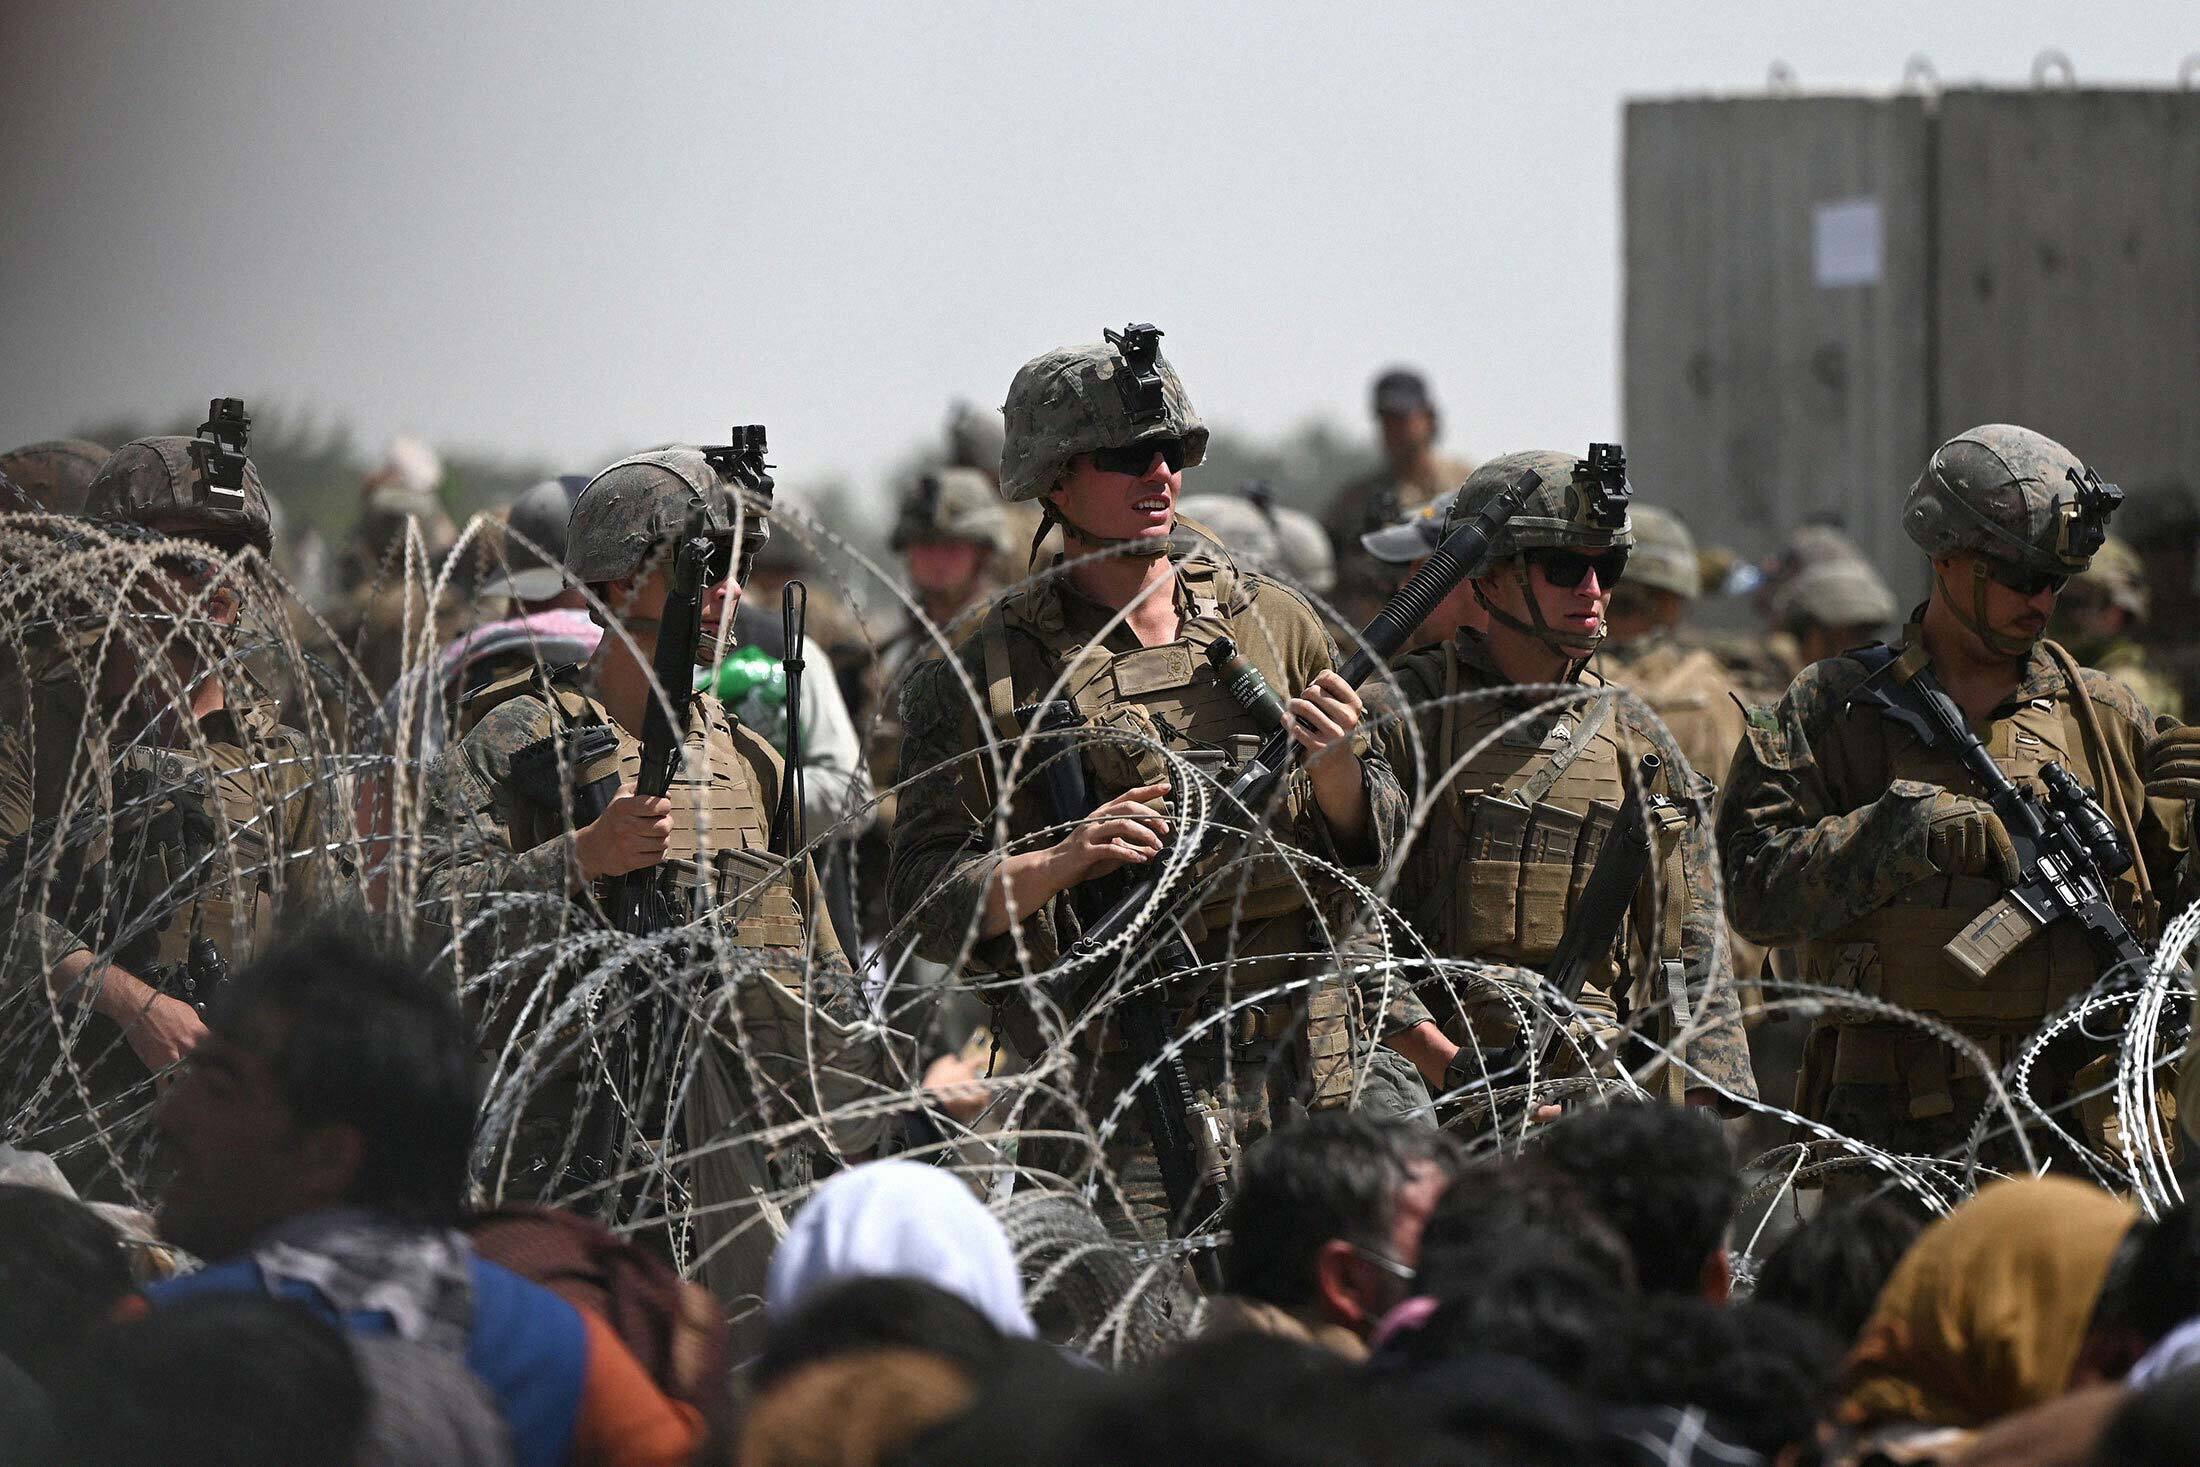 U.S. soldiers stand guard behind barbed wire as Afghans hoping to flee the country sit on a roadside near the military part of the airport in Kabul on Aug. 20.